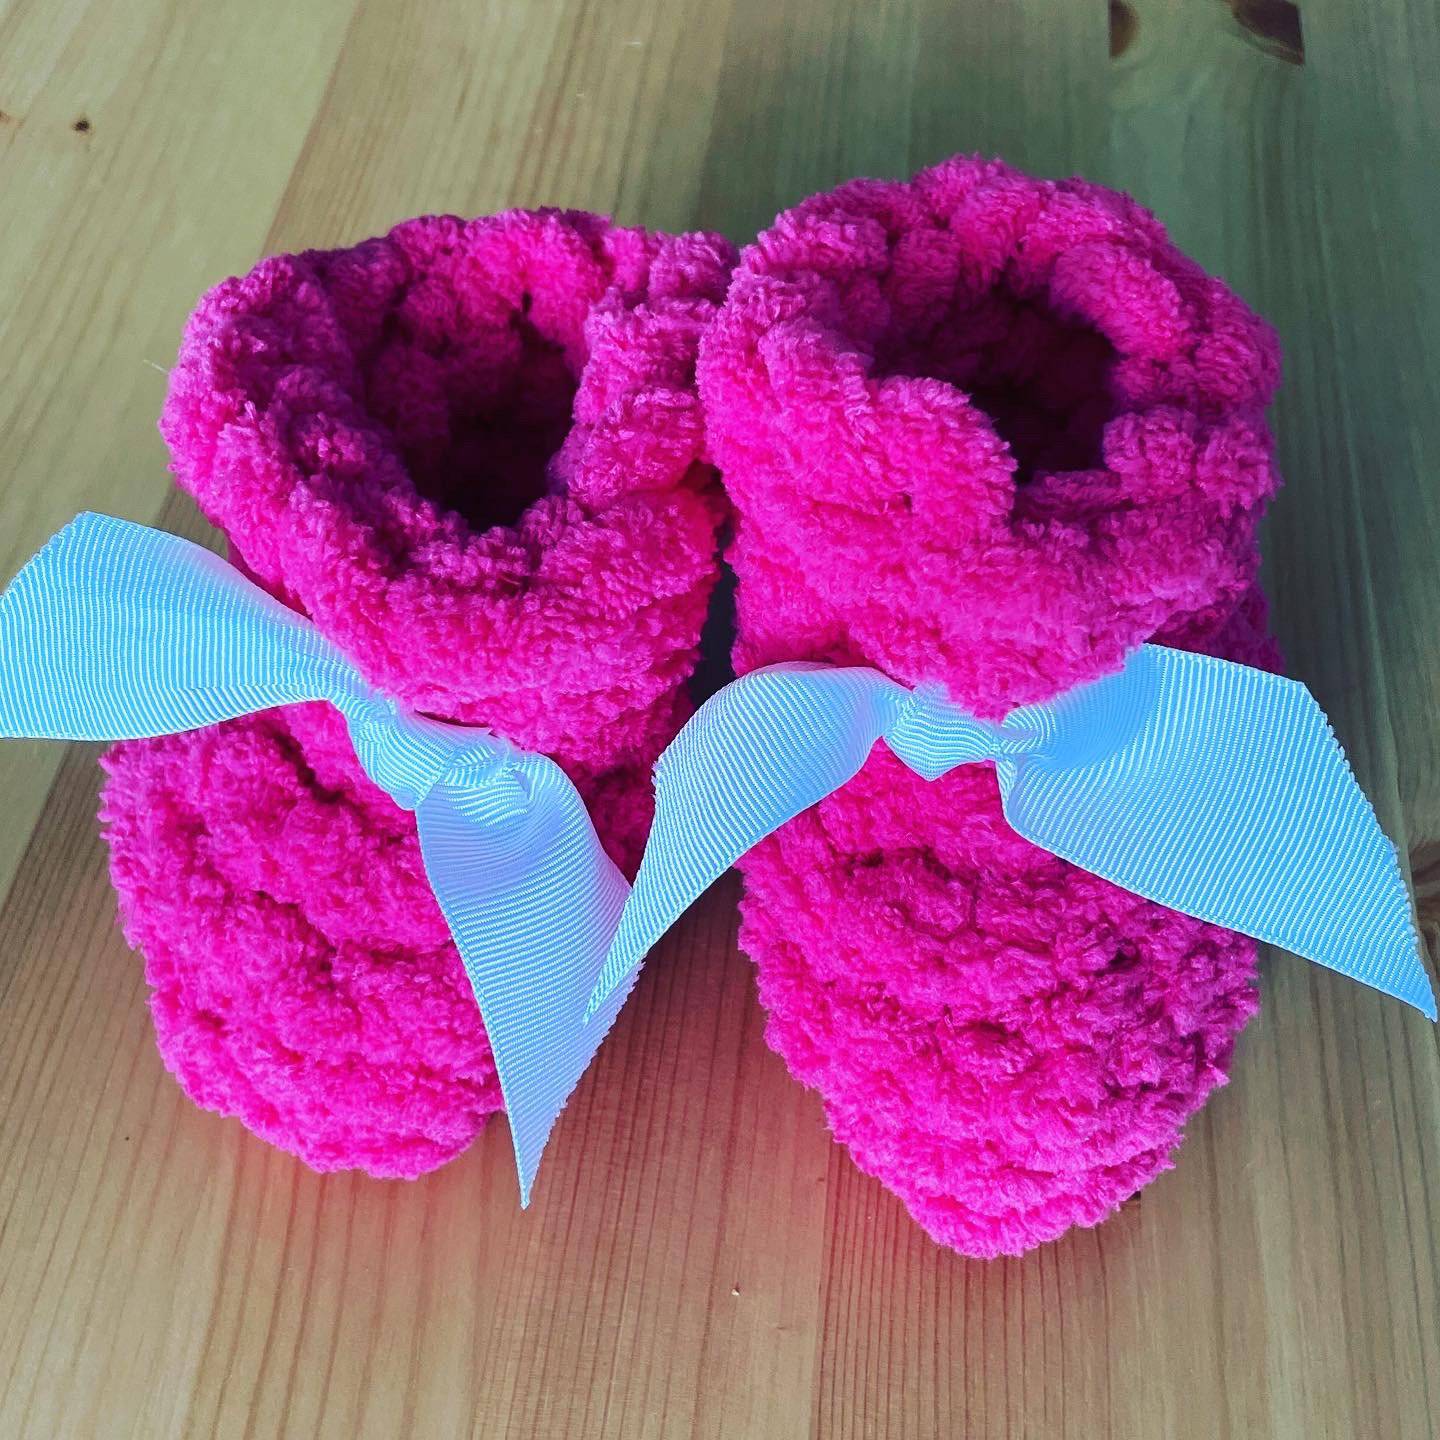 Soft Chenille Baby Booties - ILoveMyBlanket